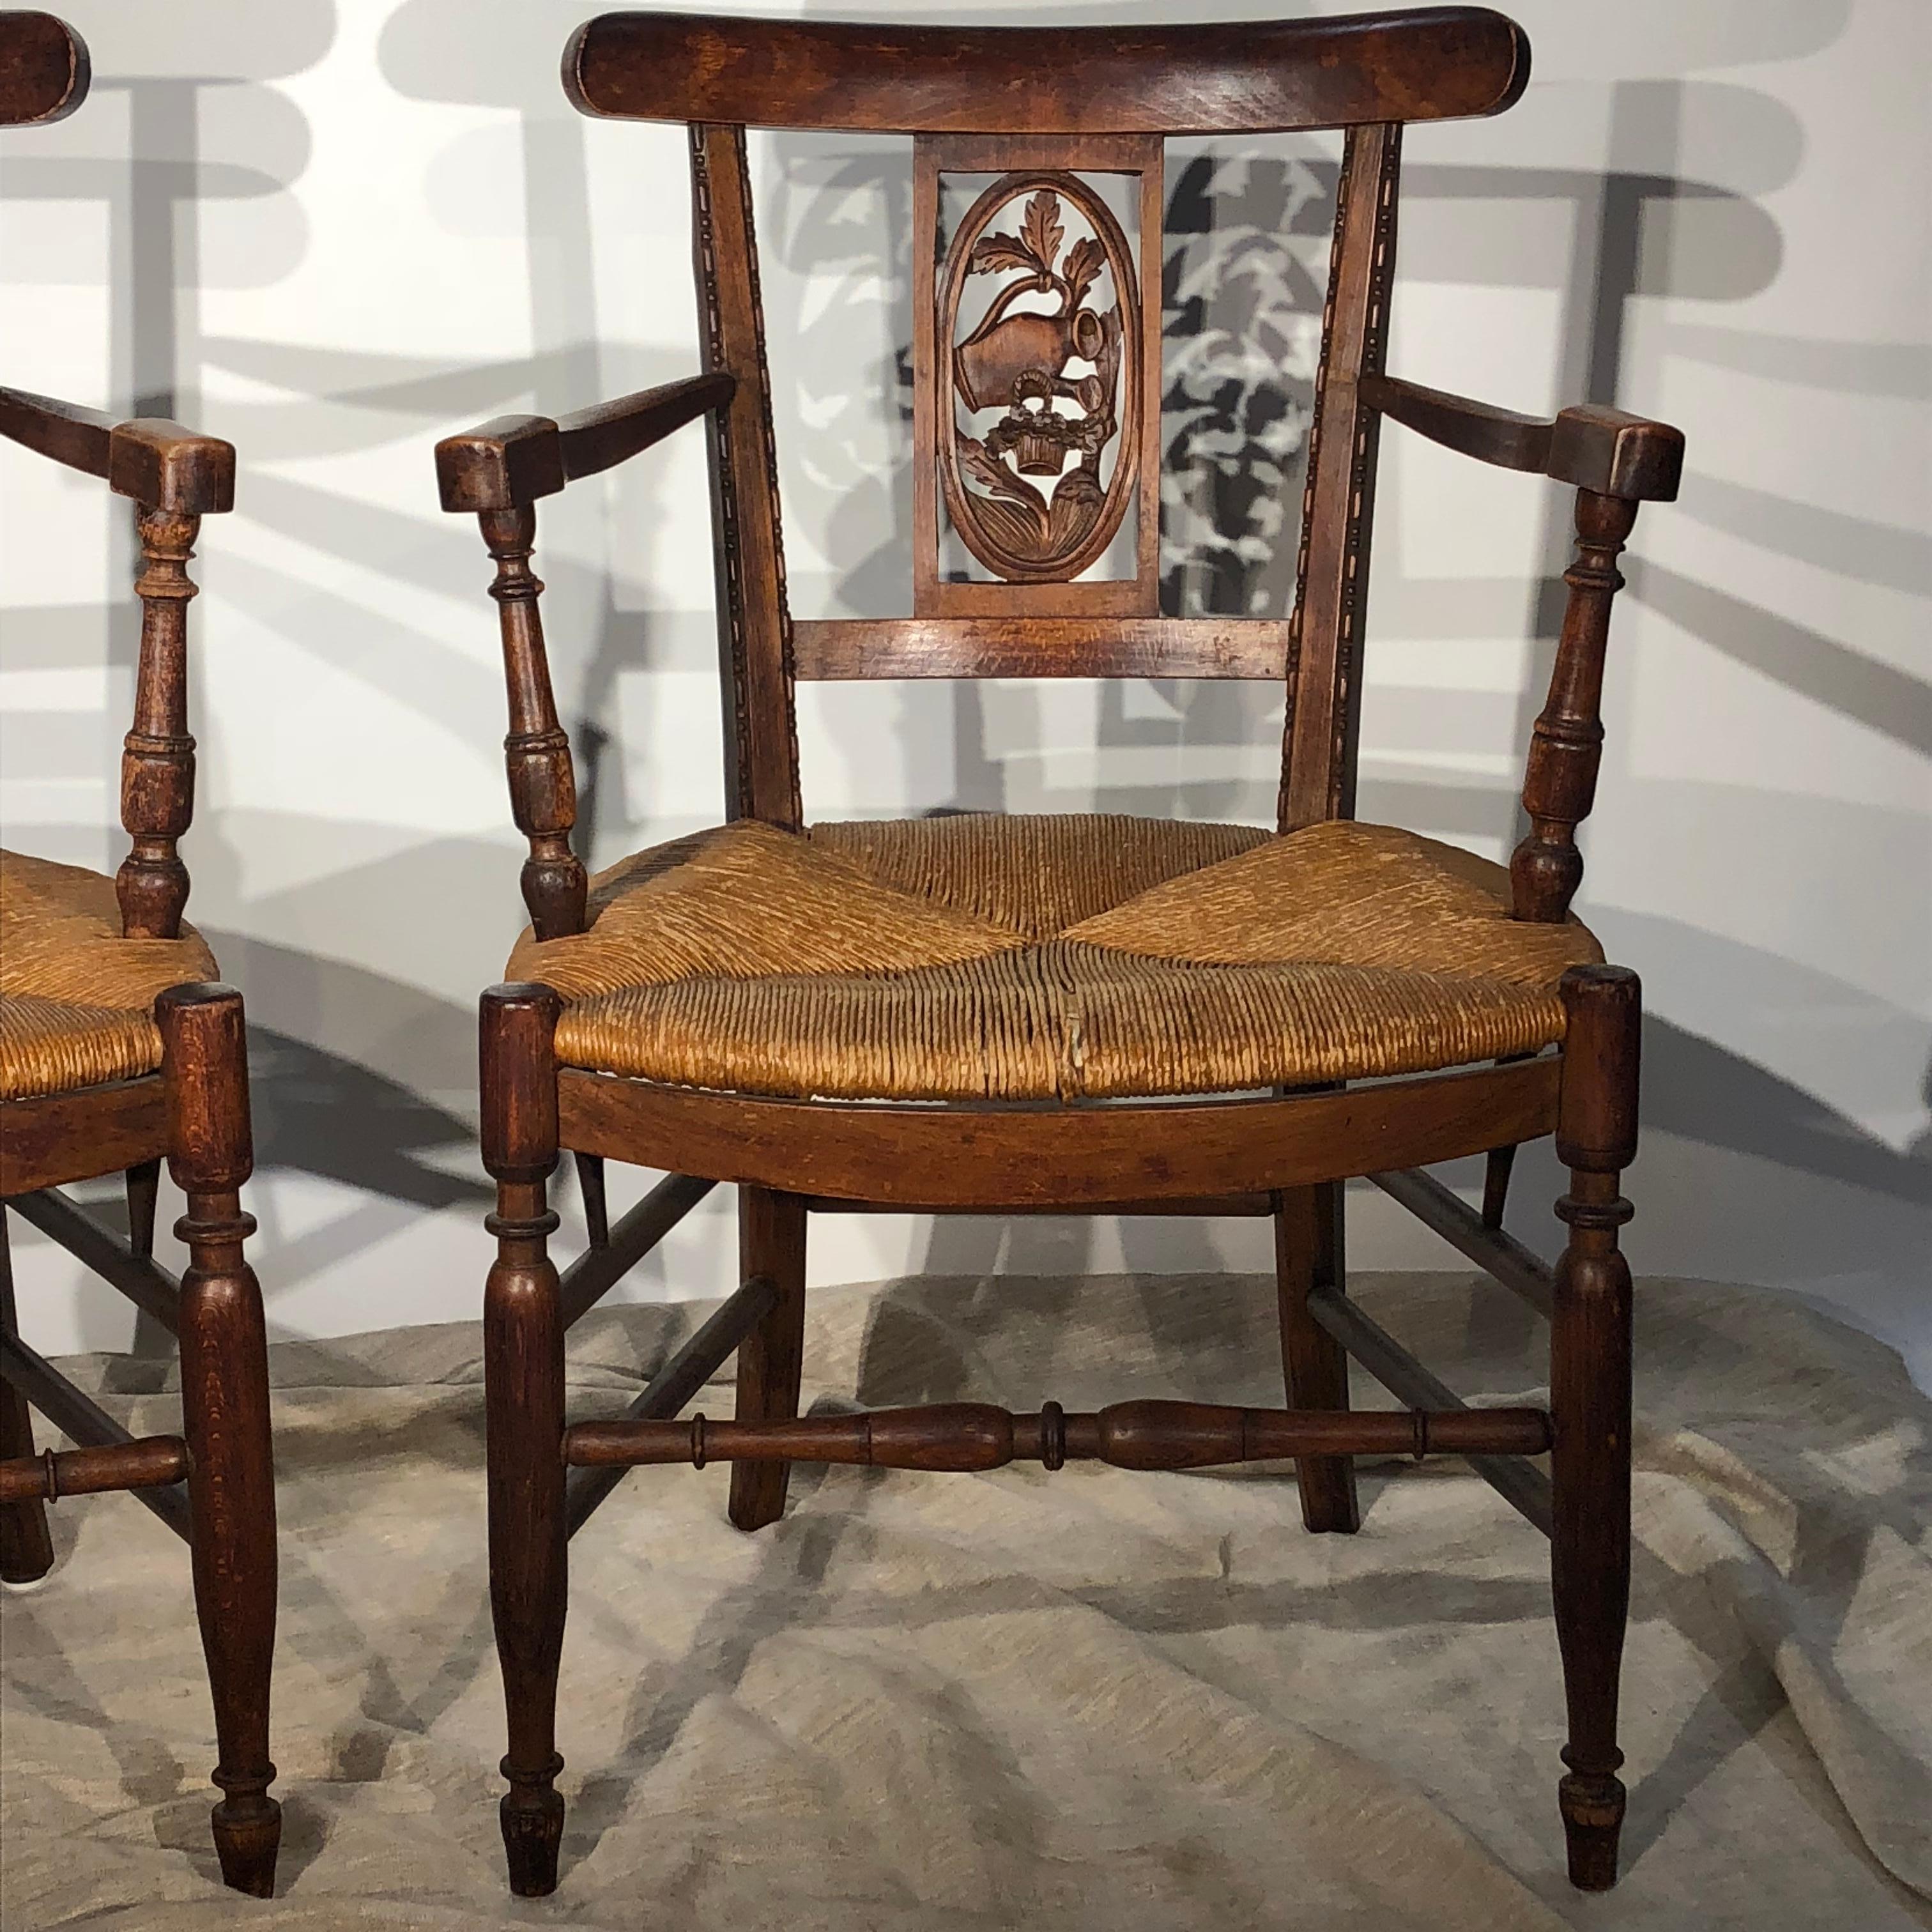 Hand-Carved Pair of French Country Armchairs, Garden Theme, 19th Century